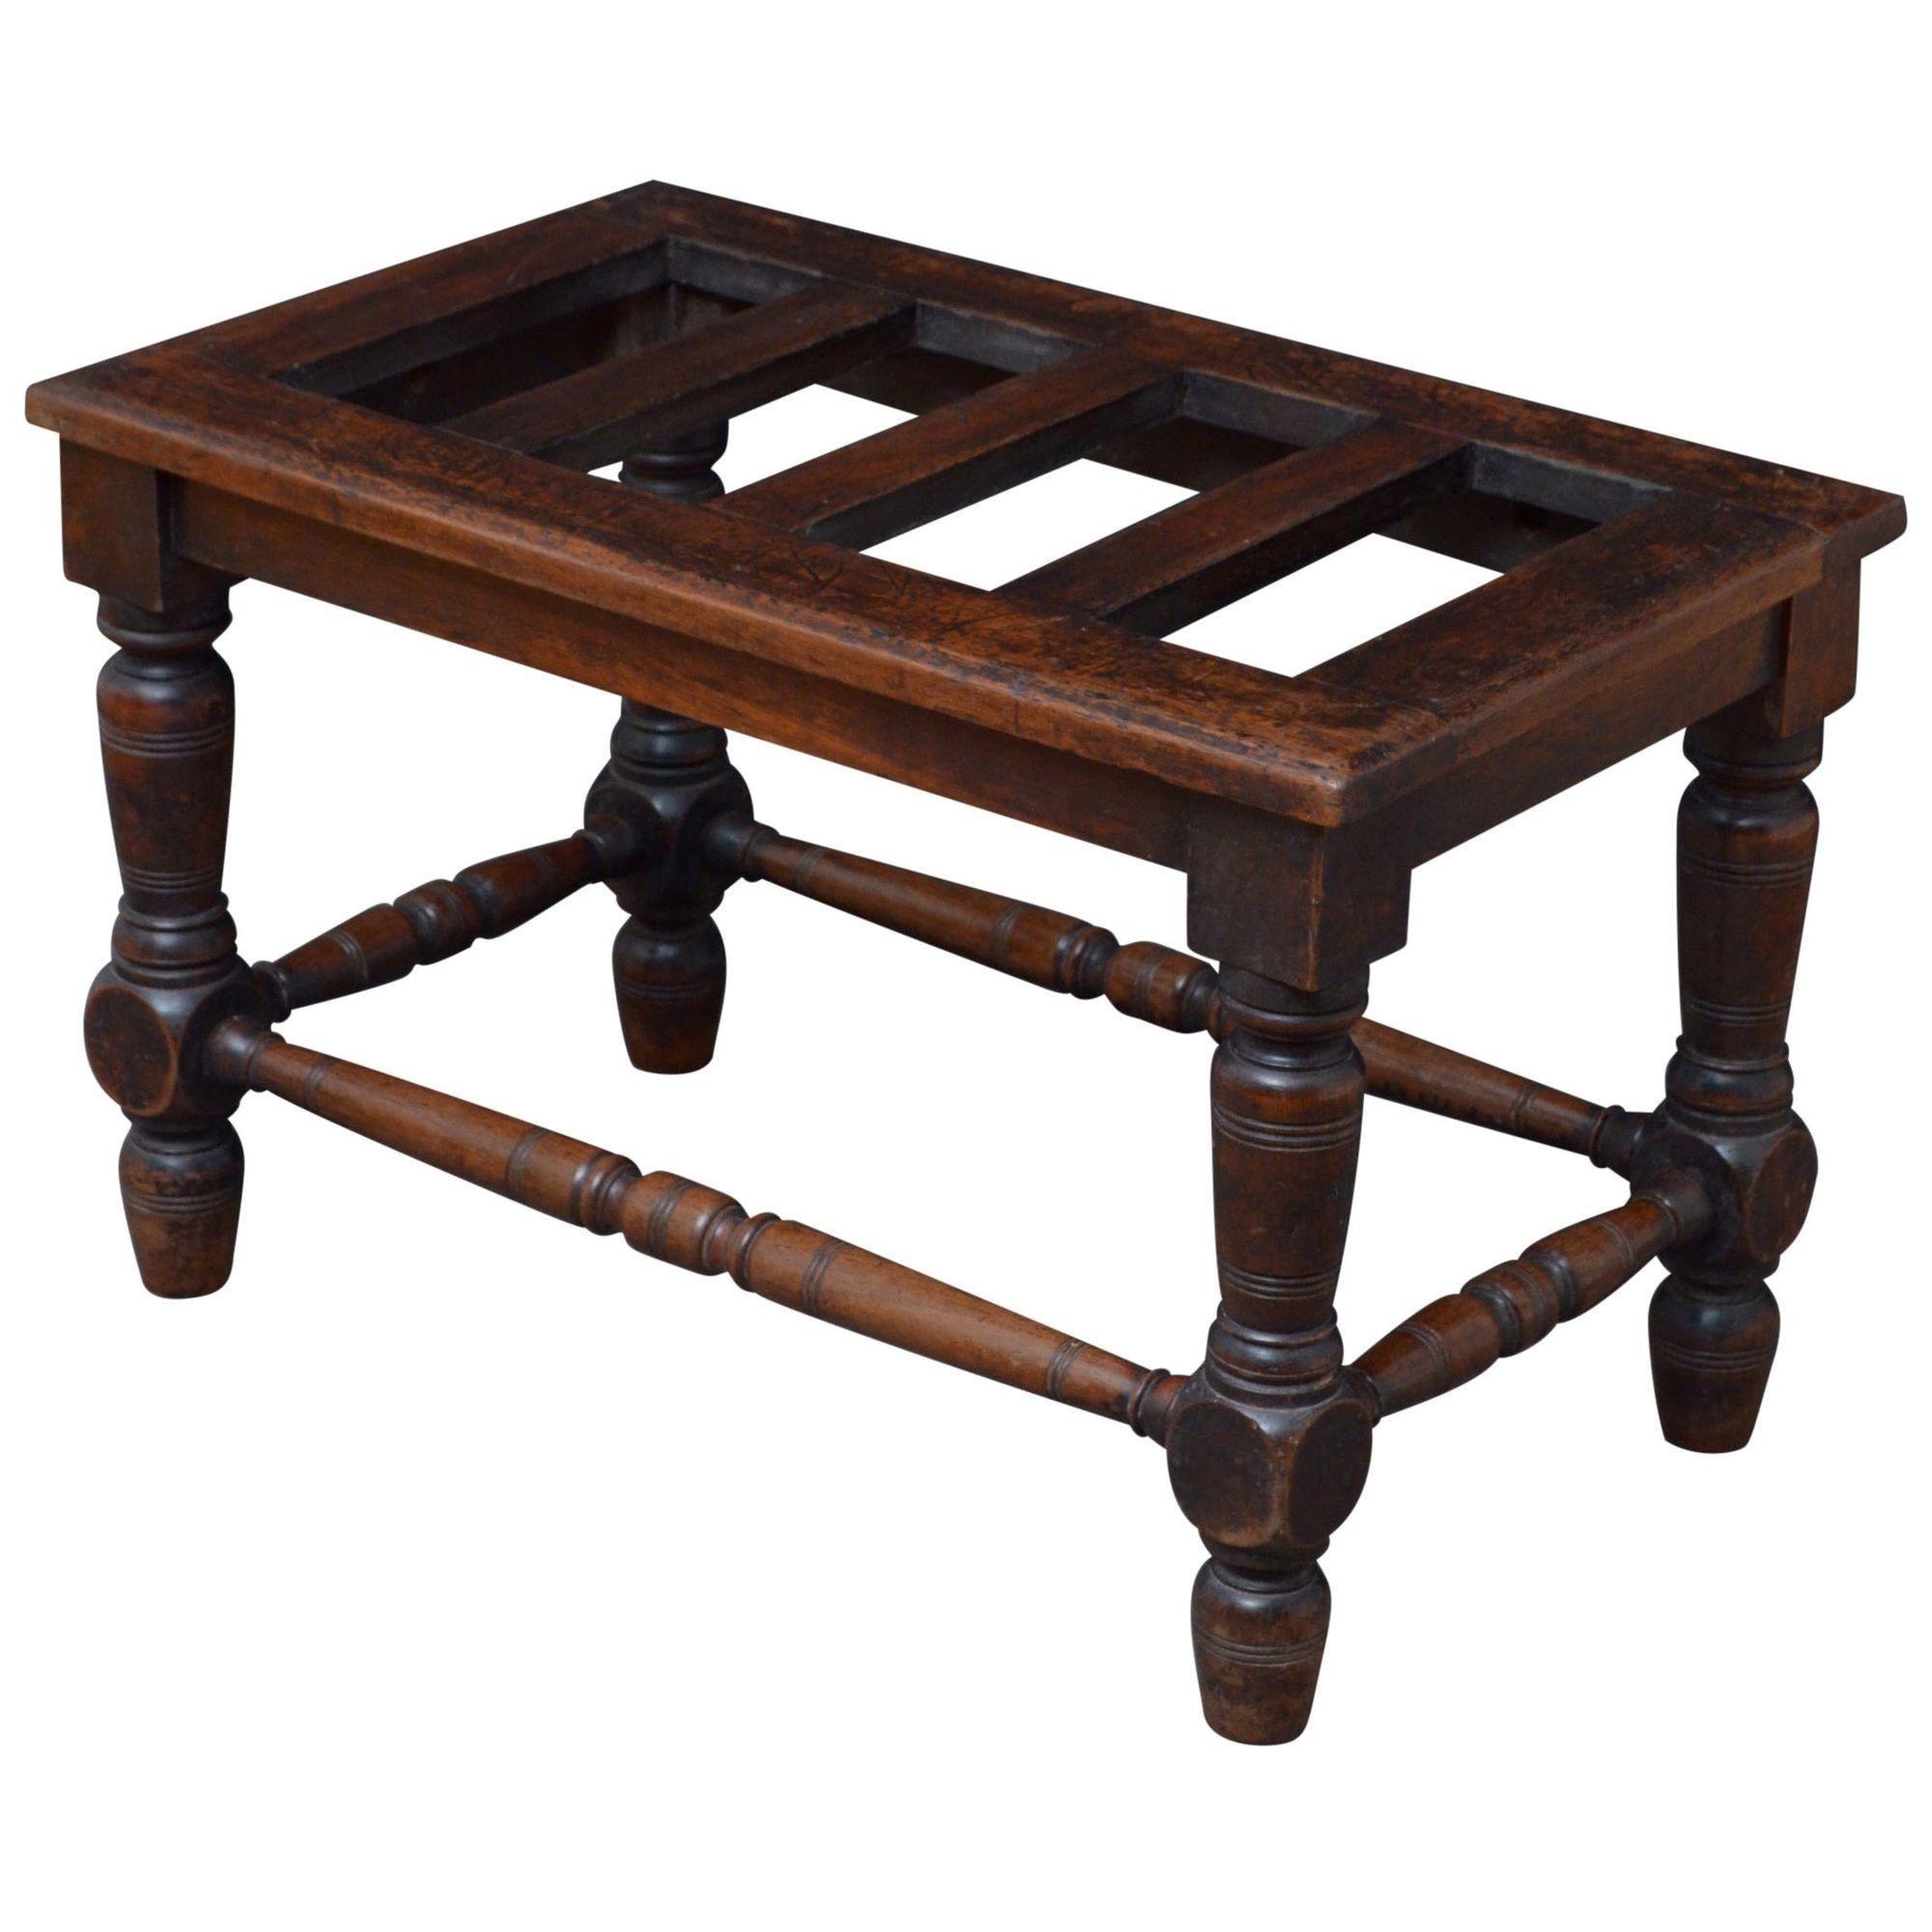 K0510 Substantial Jas Shoolbred solid mahogany luggage rack on turned and ringed legs united by turned and ringed stretcher. This antique luggage rack would make a good hall seat. Stamped Jas Shoolbred 5.
This piece retains original finish and